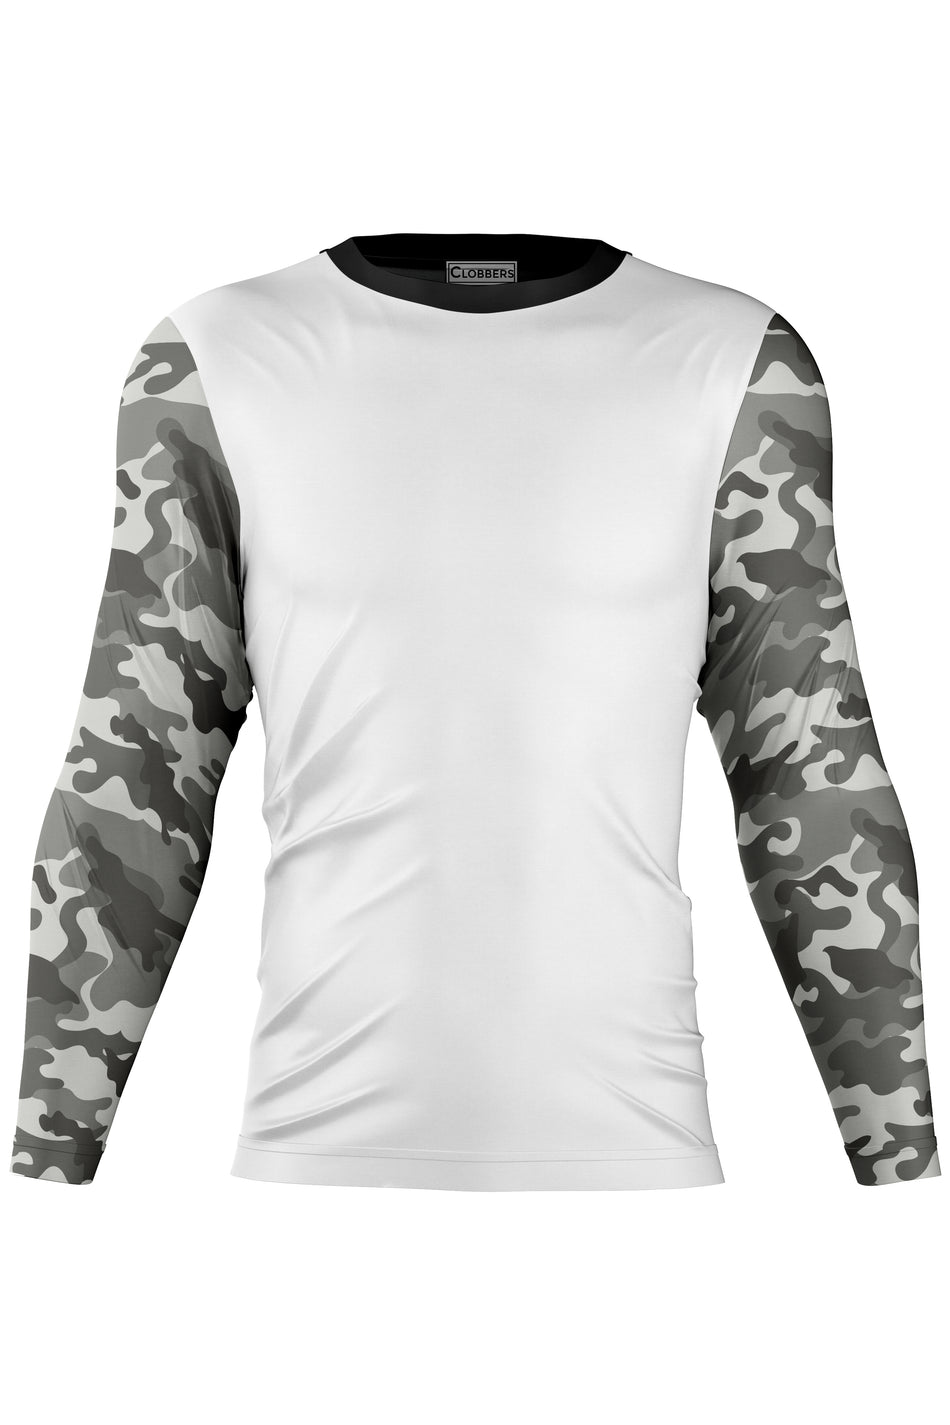 AOUTF - GREY CAMUFLAGE FULL SLEEVES TSHIRT